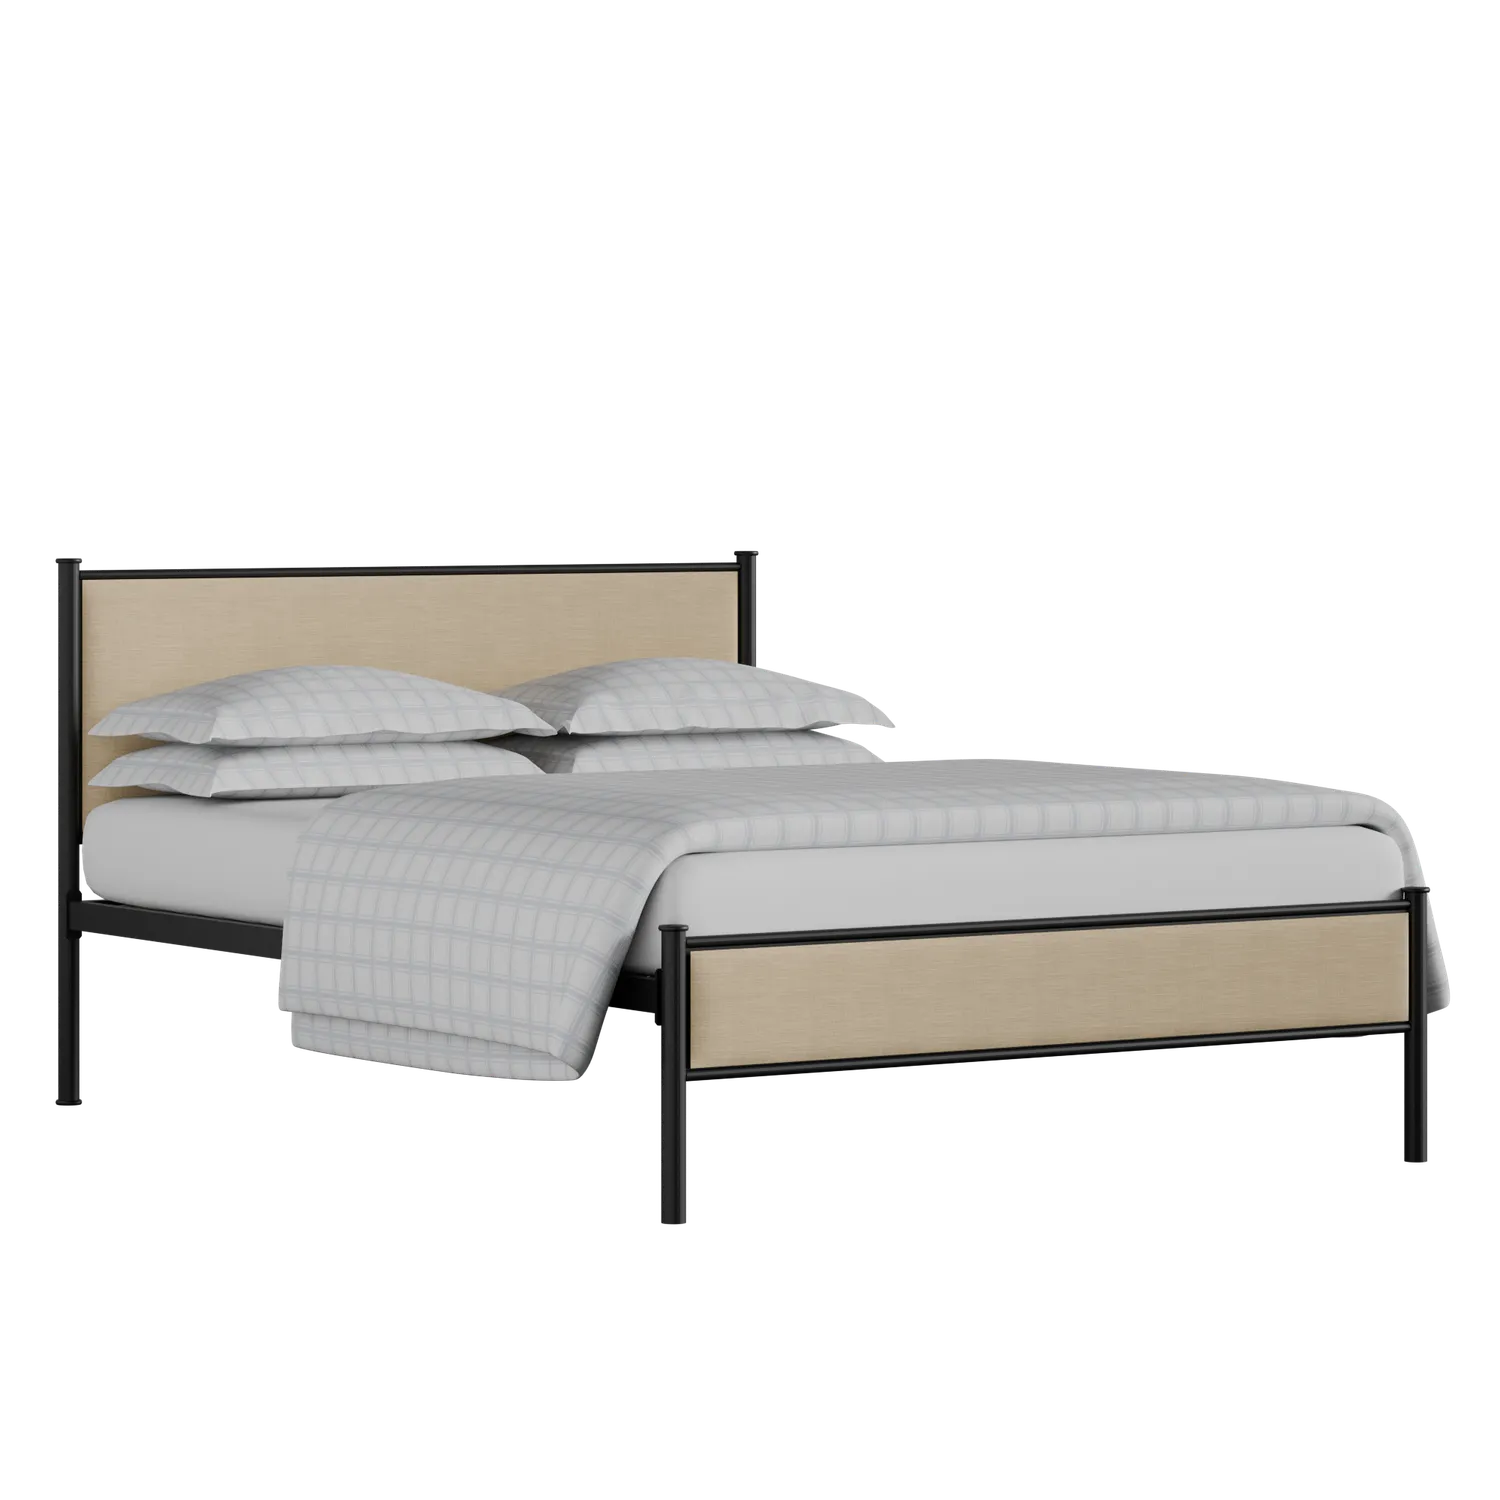 Brest iron/metal upholstered bed in black with natural fabric